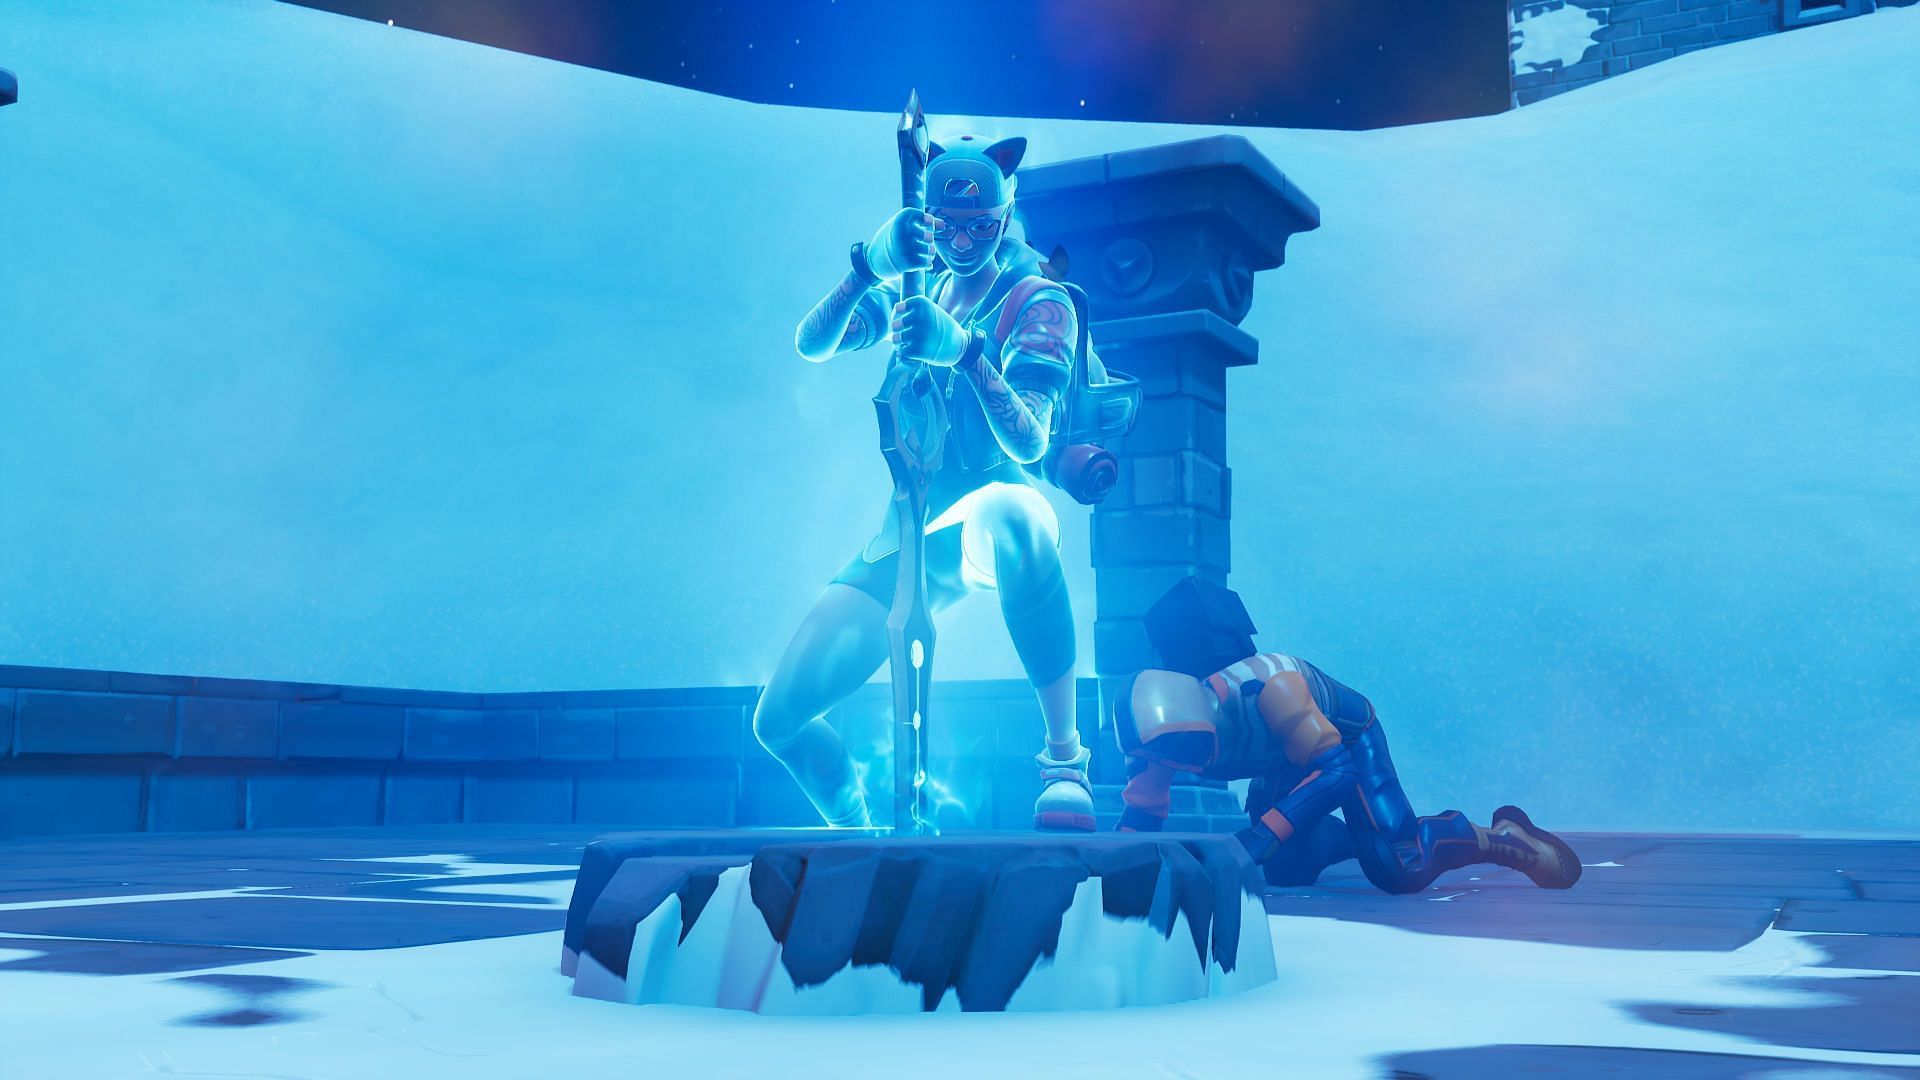 Infinity Blade was the most overpowered melee weapon in Fortnite Battle Royale history (Image via Epic Games)